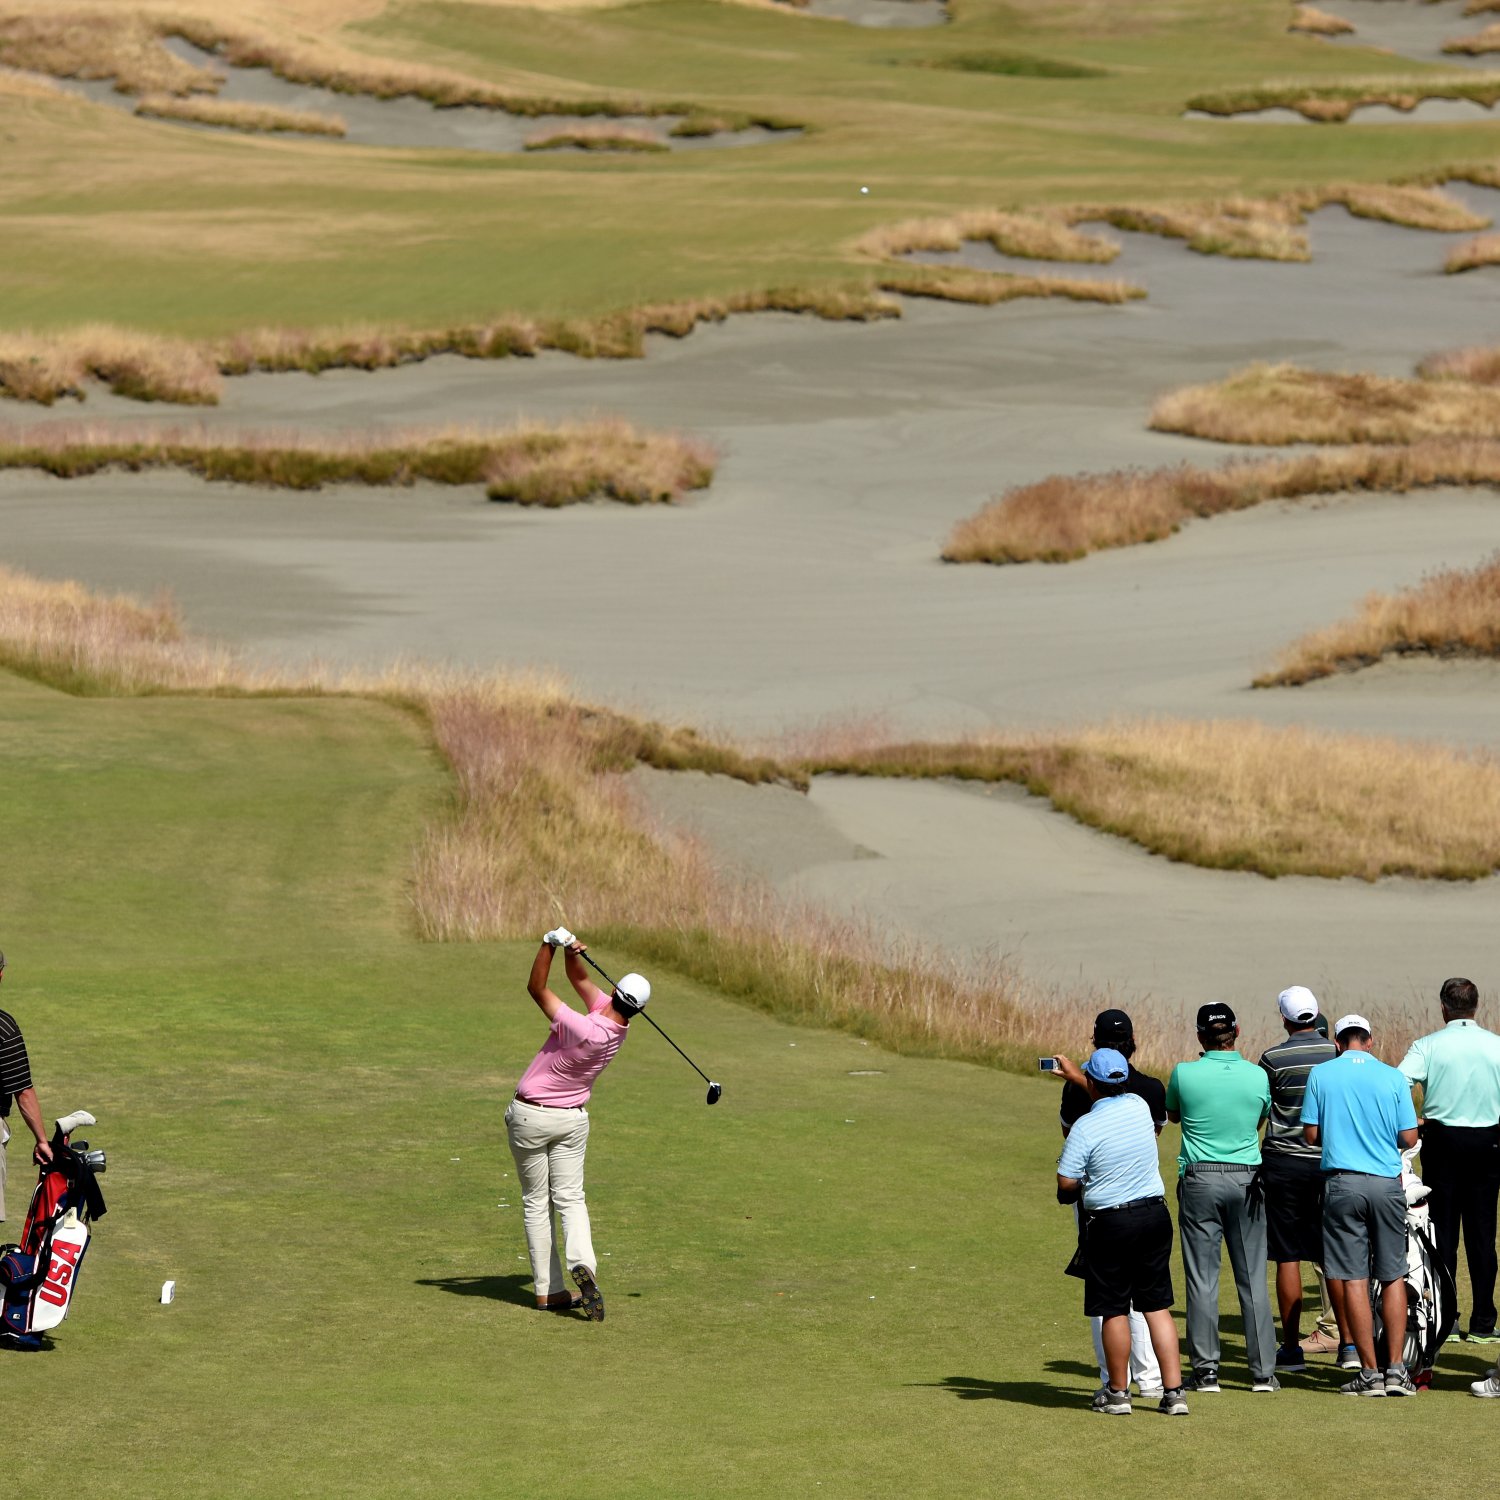 US Open Golf Schedule 2015: Tee Times, Live Stream and TV Coverage Listings | Bleacher ...